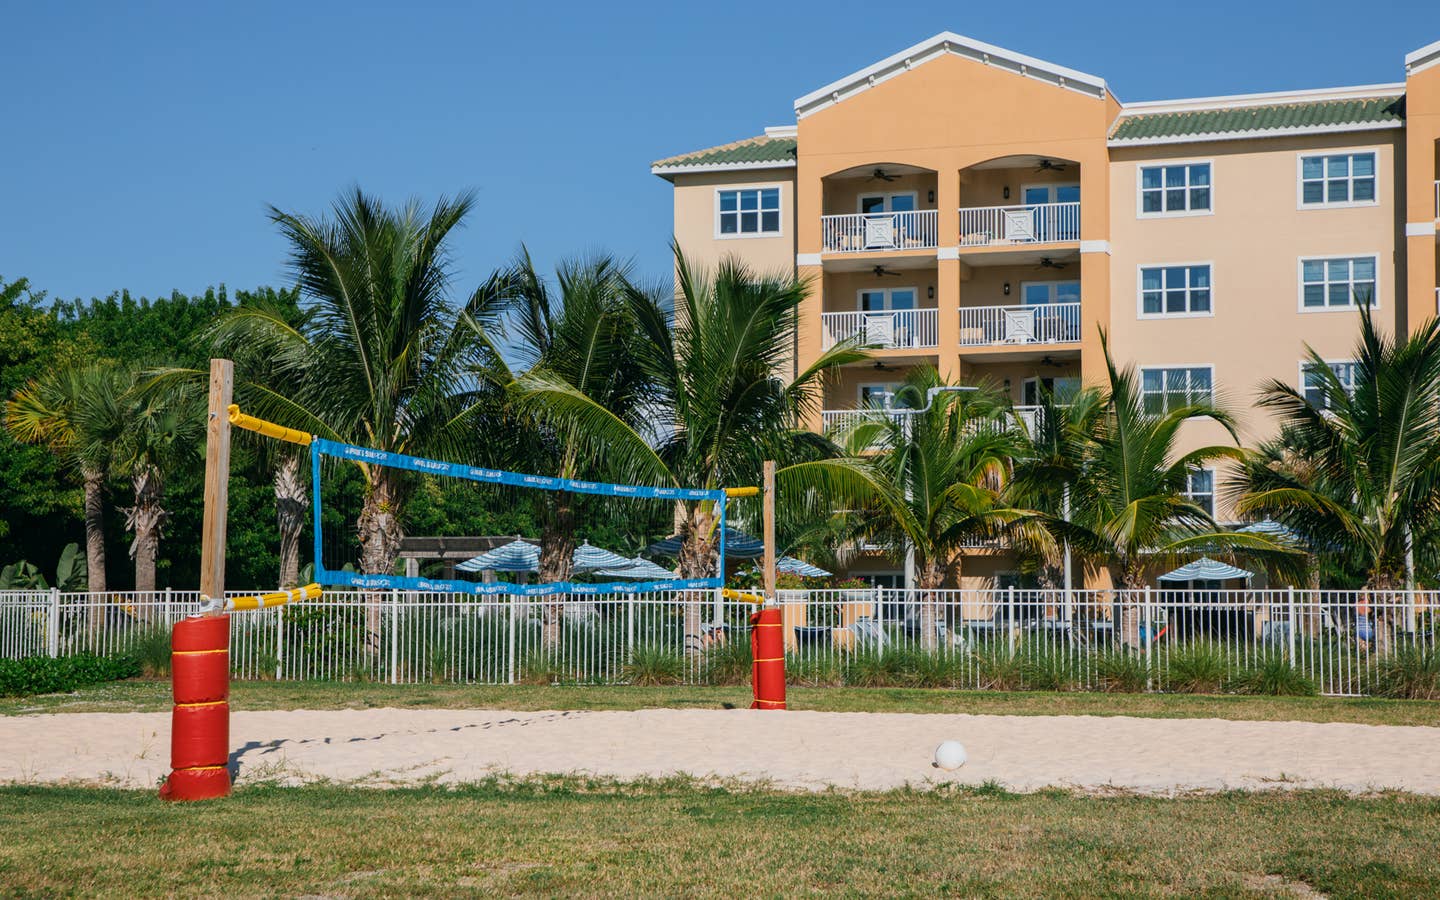 Sand volleyball court at Cape Canaveral Beach Resort in Florida.